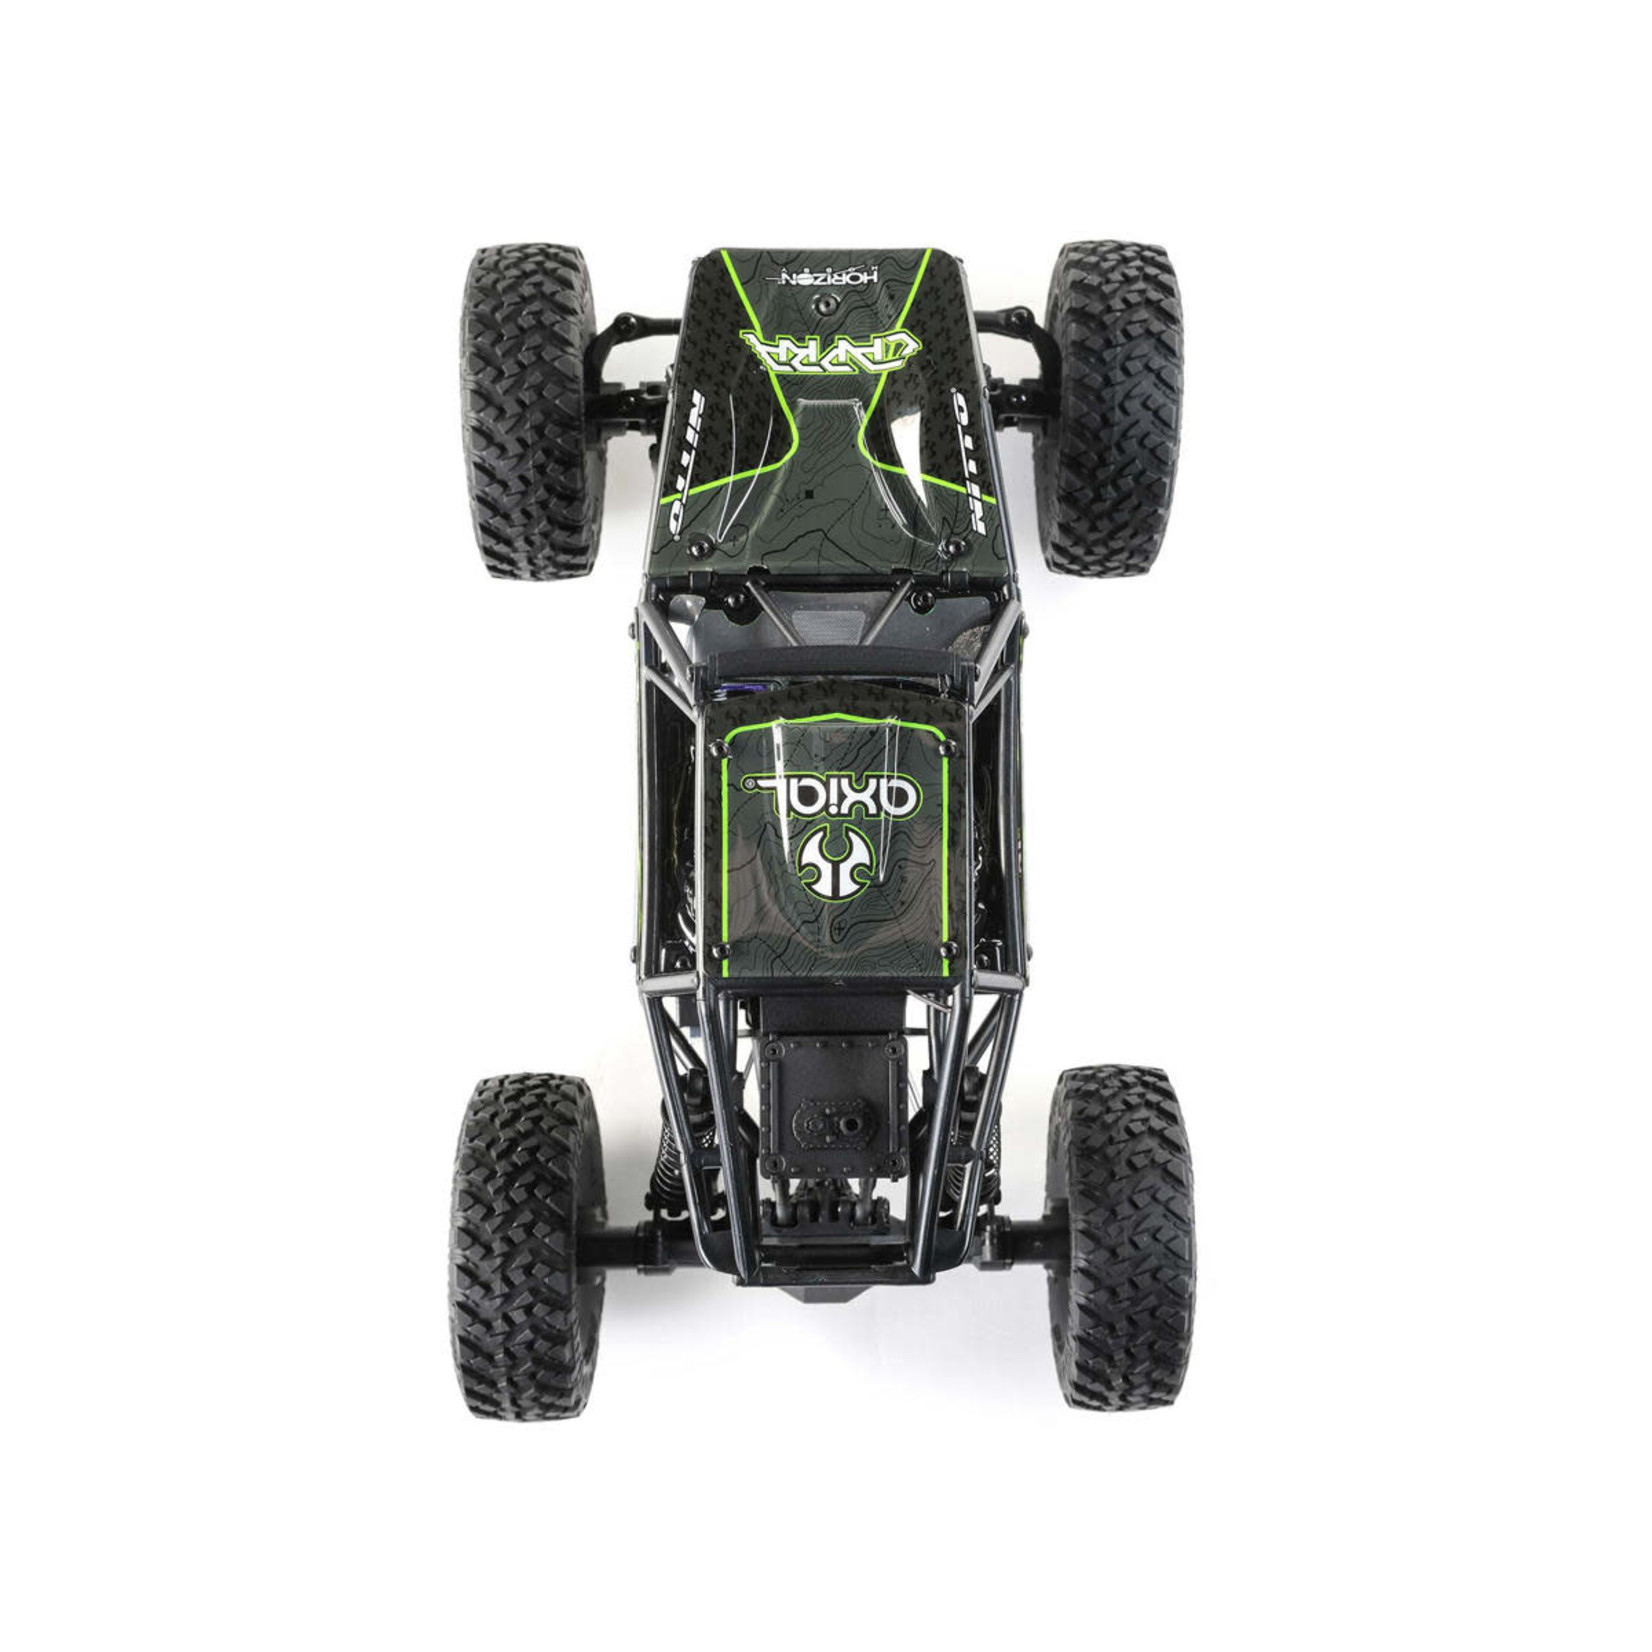 Axial Axial UTB18 Capra 1/18 RTR 4WD Unlimited Trail Buggy (Black) w/2.4GHz Radio, Battery & Charger #AXI01002T1